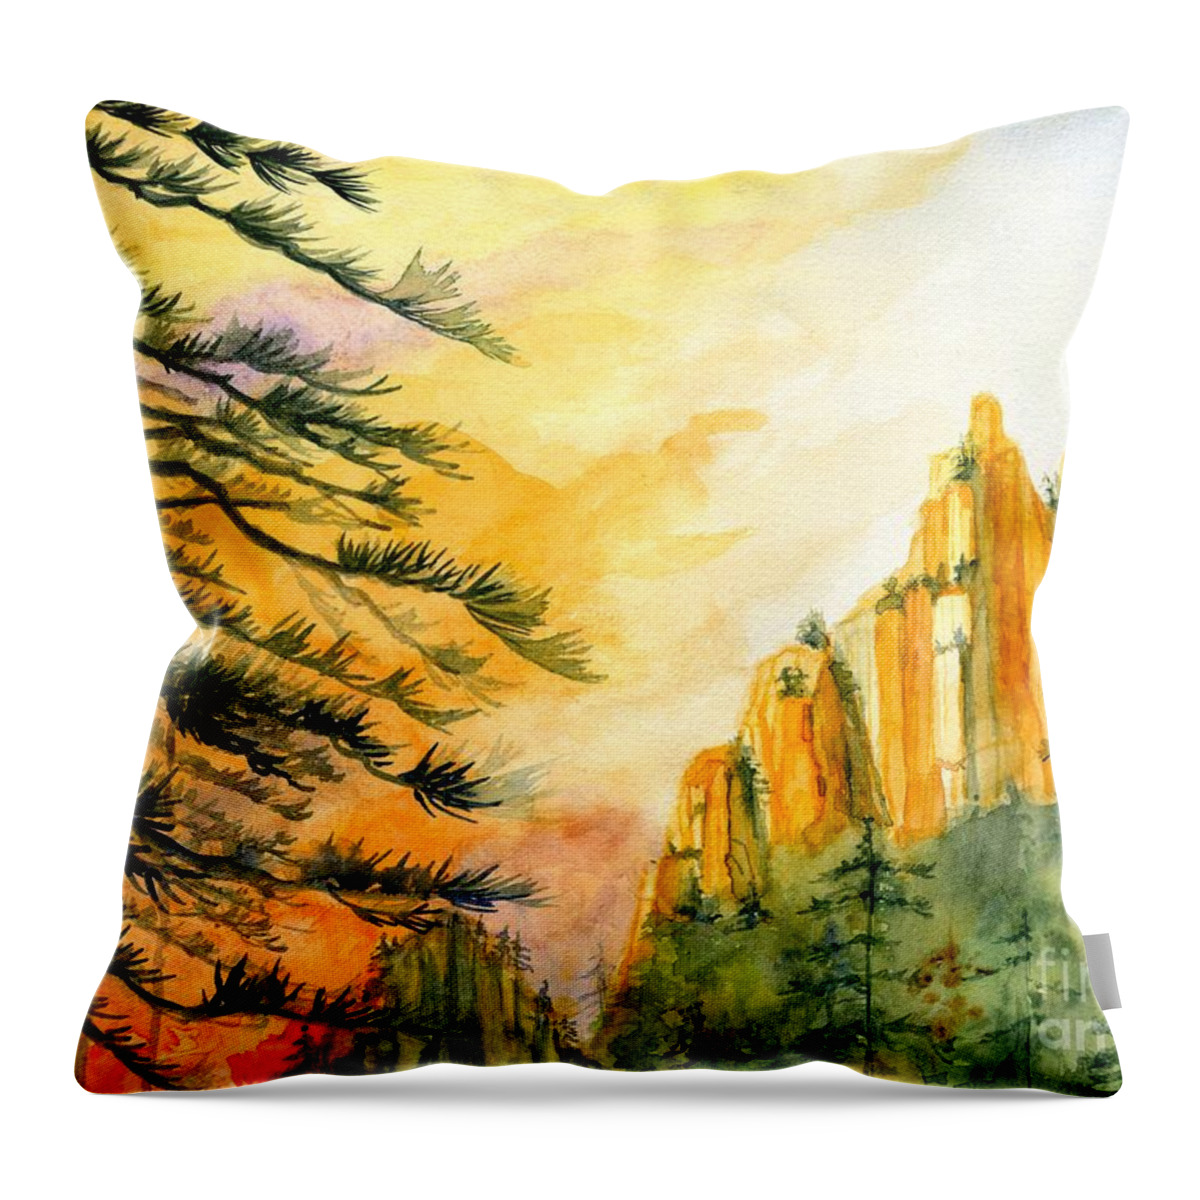 Mountain Sunset Throw Pillow featuring the painting Mountain Sunset by Melly Terpening